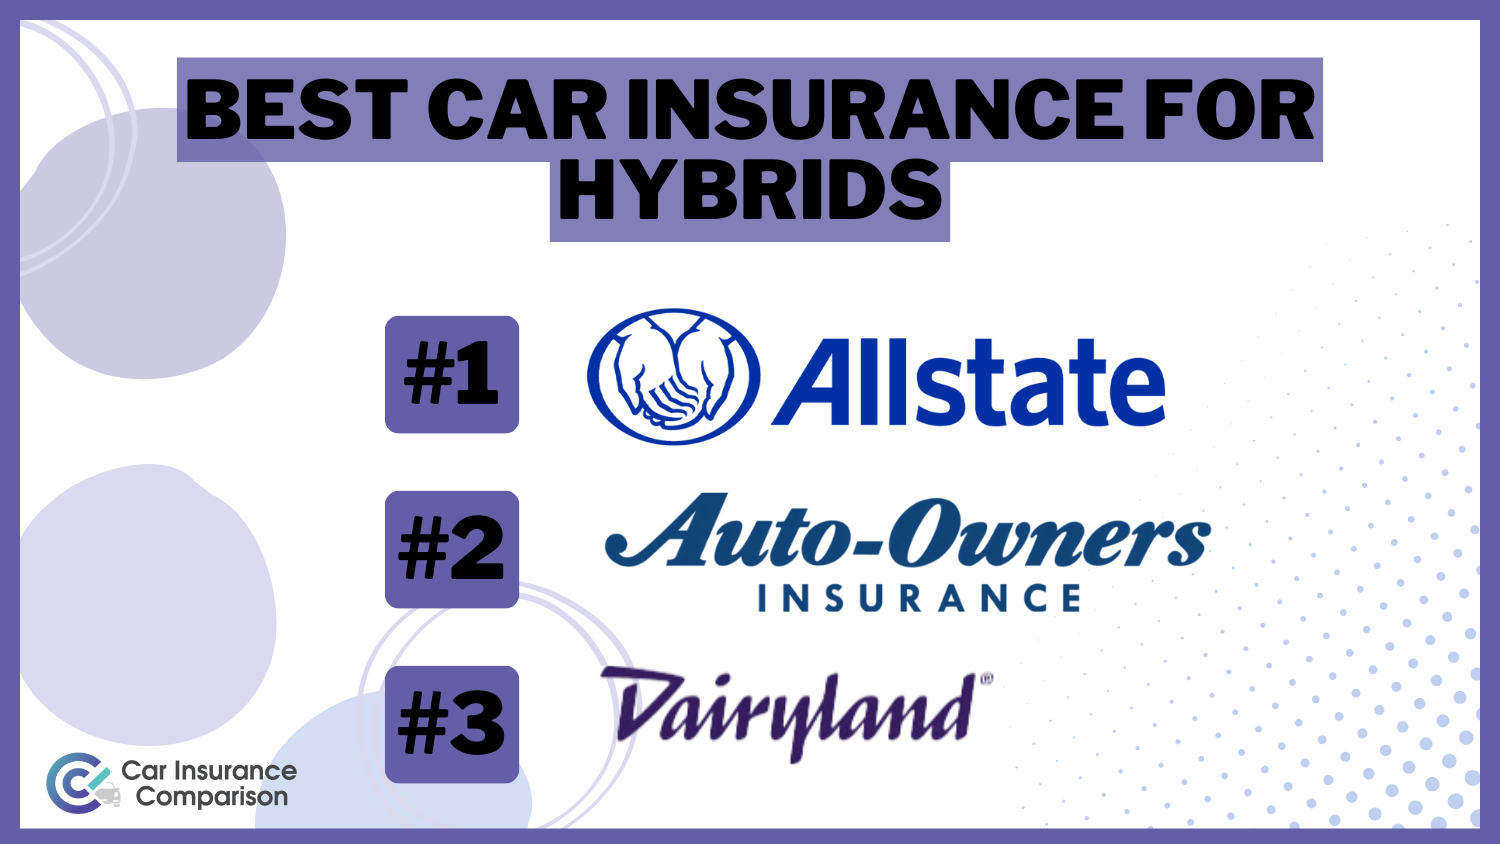 best car insurance for hybrids: Allstate, auto-Owners, Dairyland